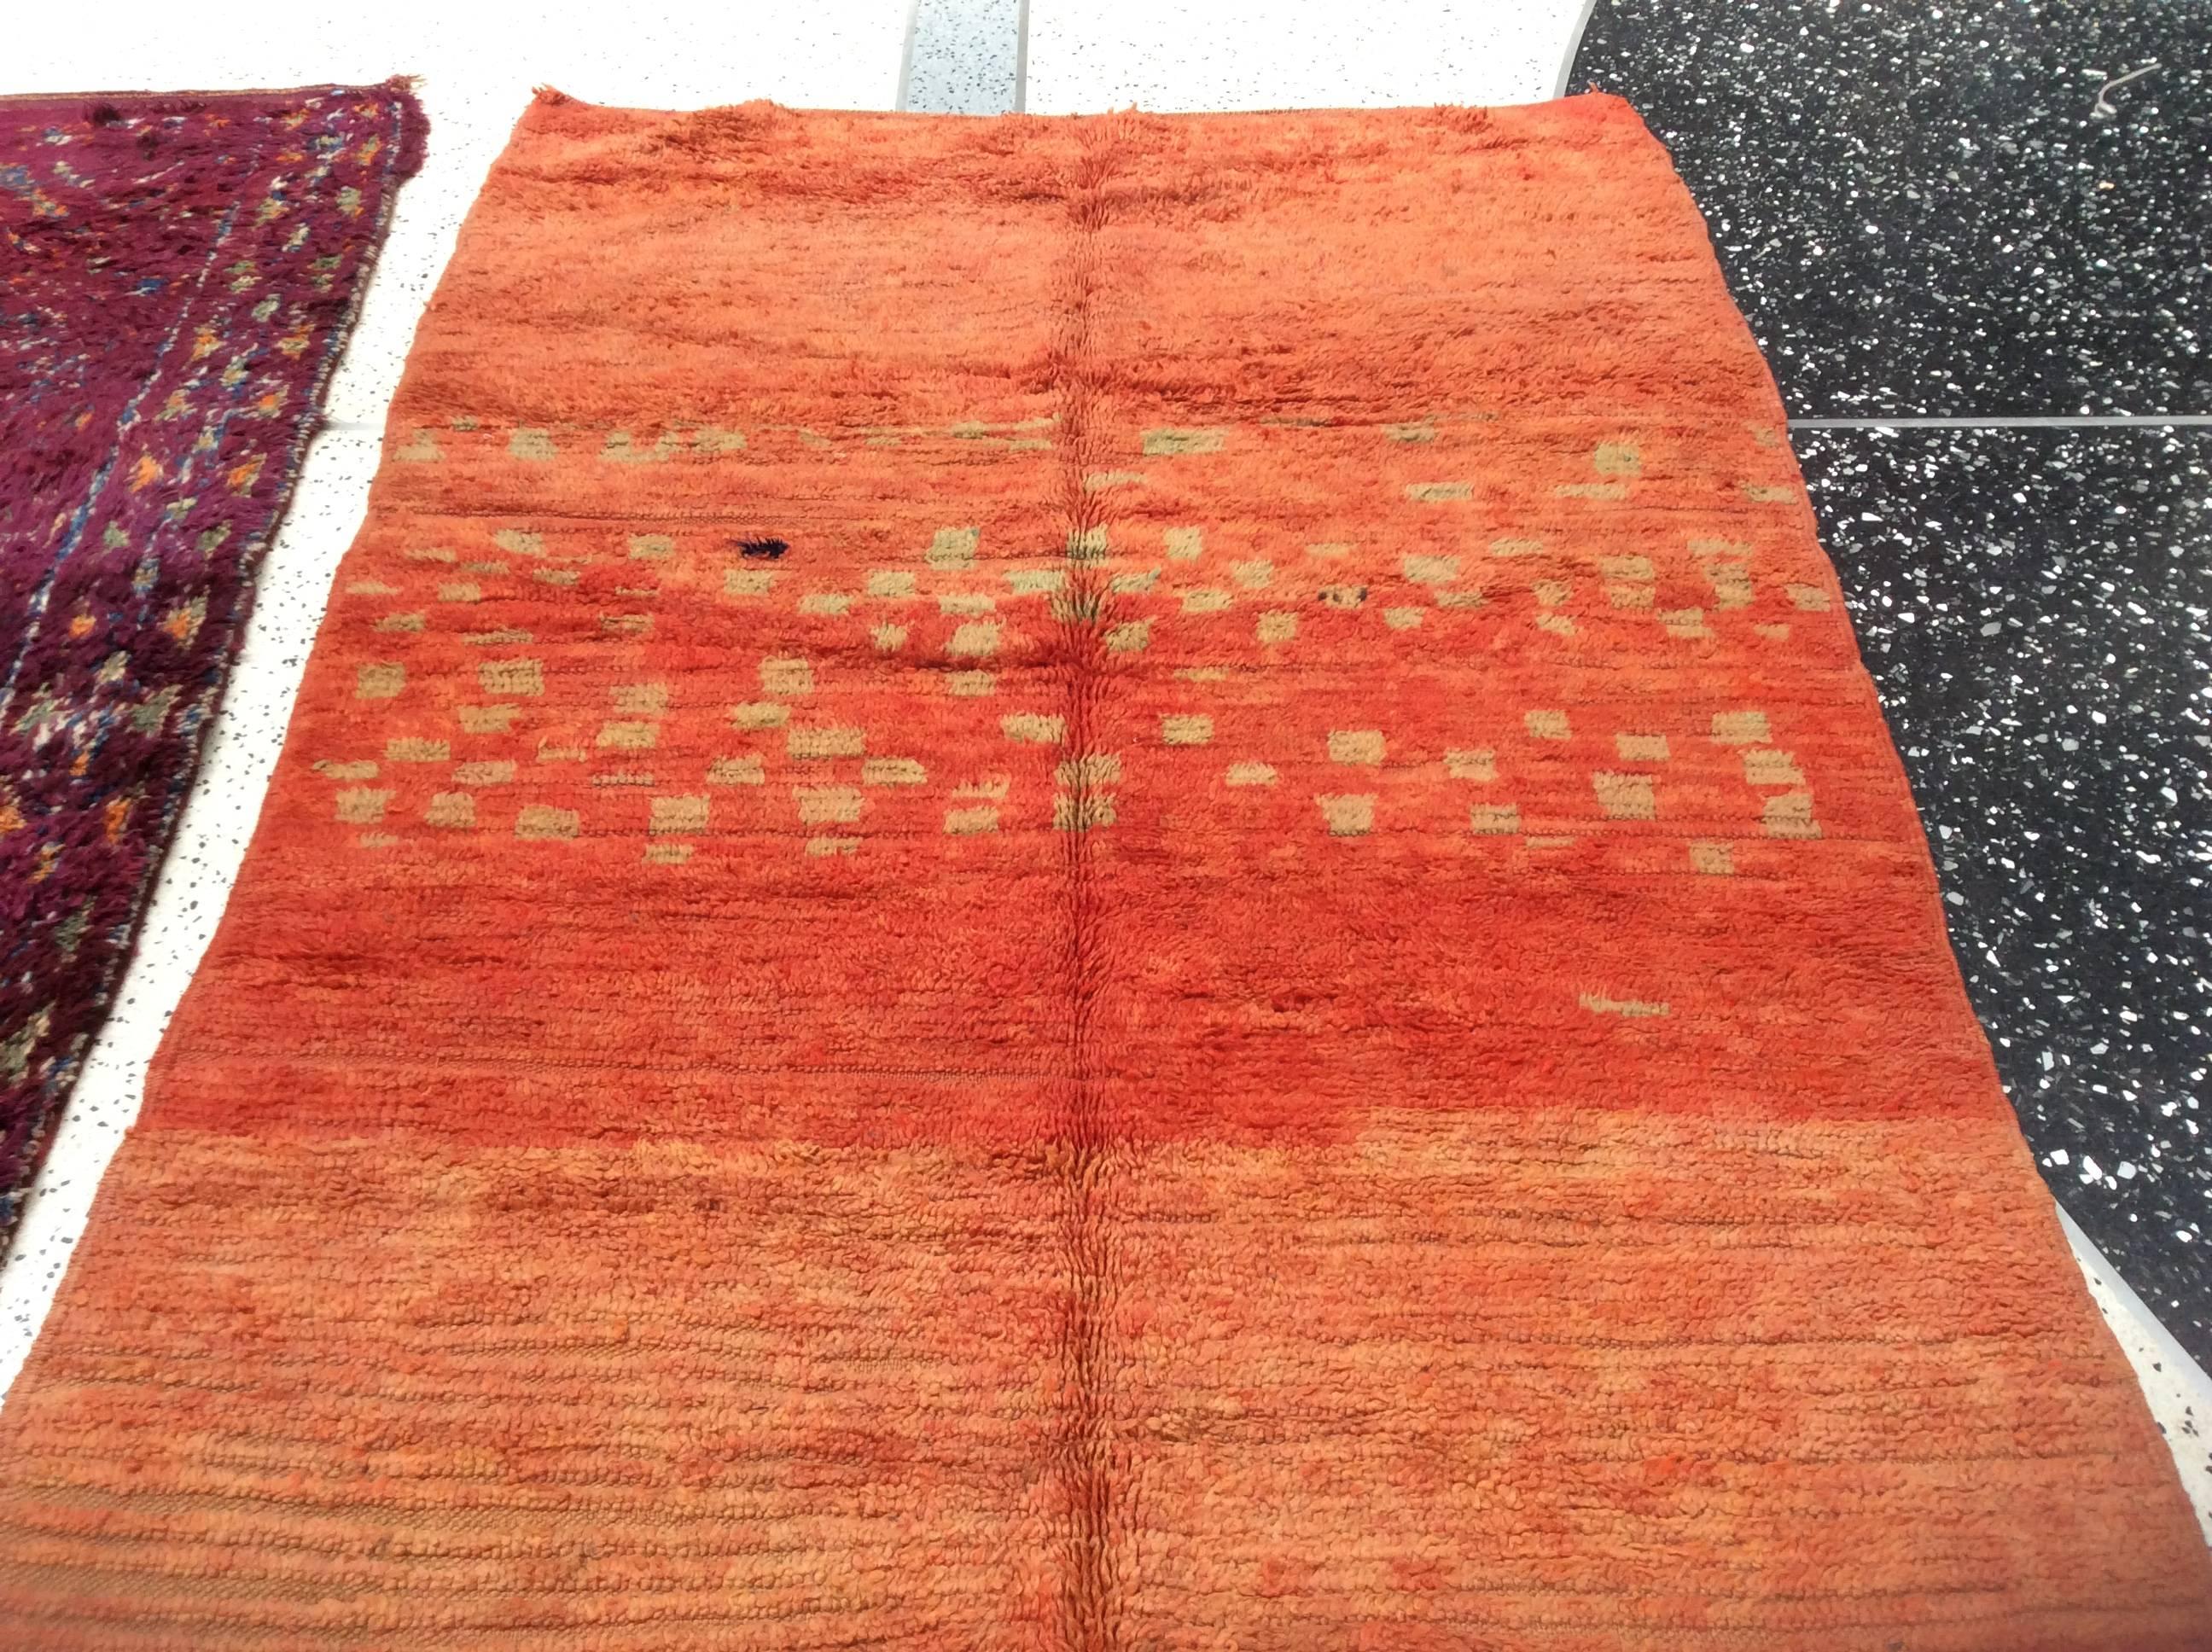 Moroccan Berber Rug In Excellent Condition For Sale In Los Angeles, CA